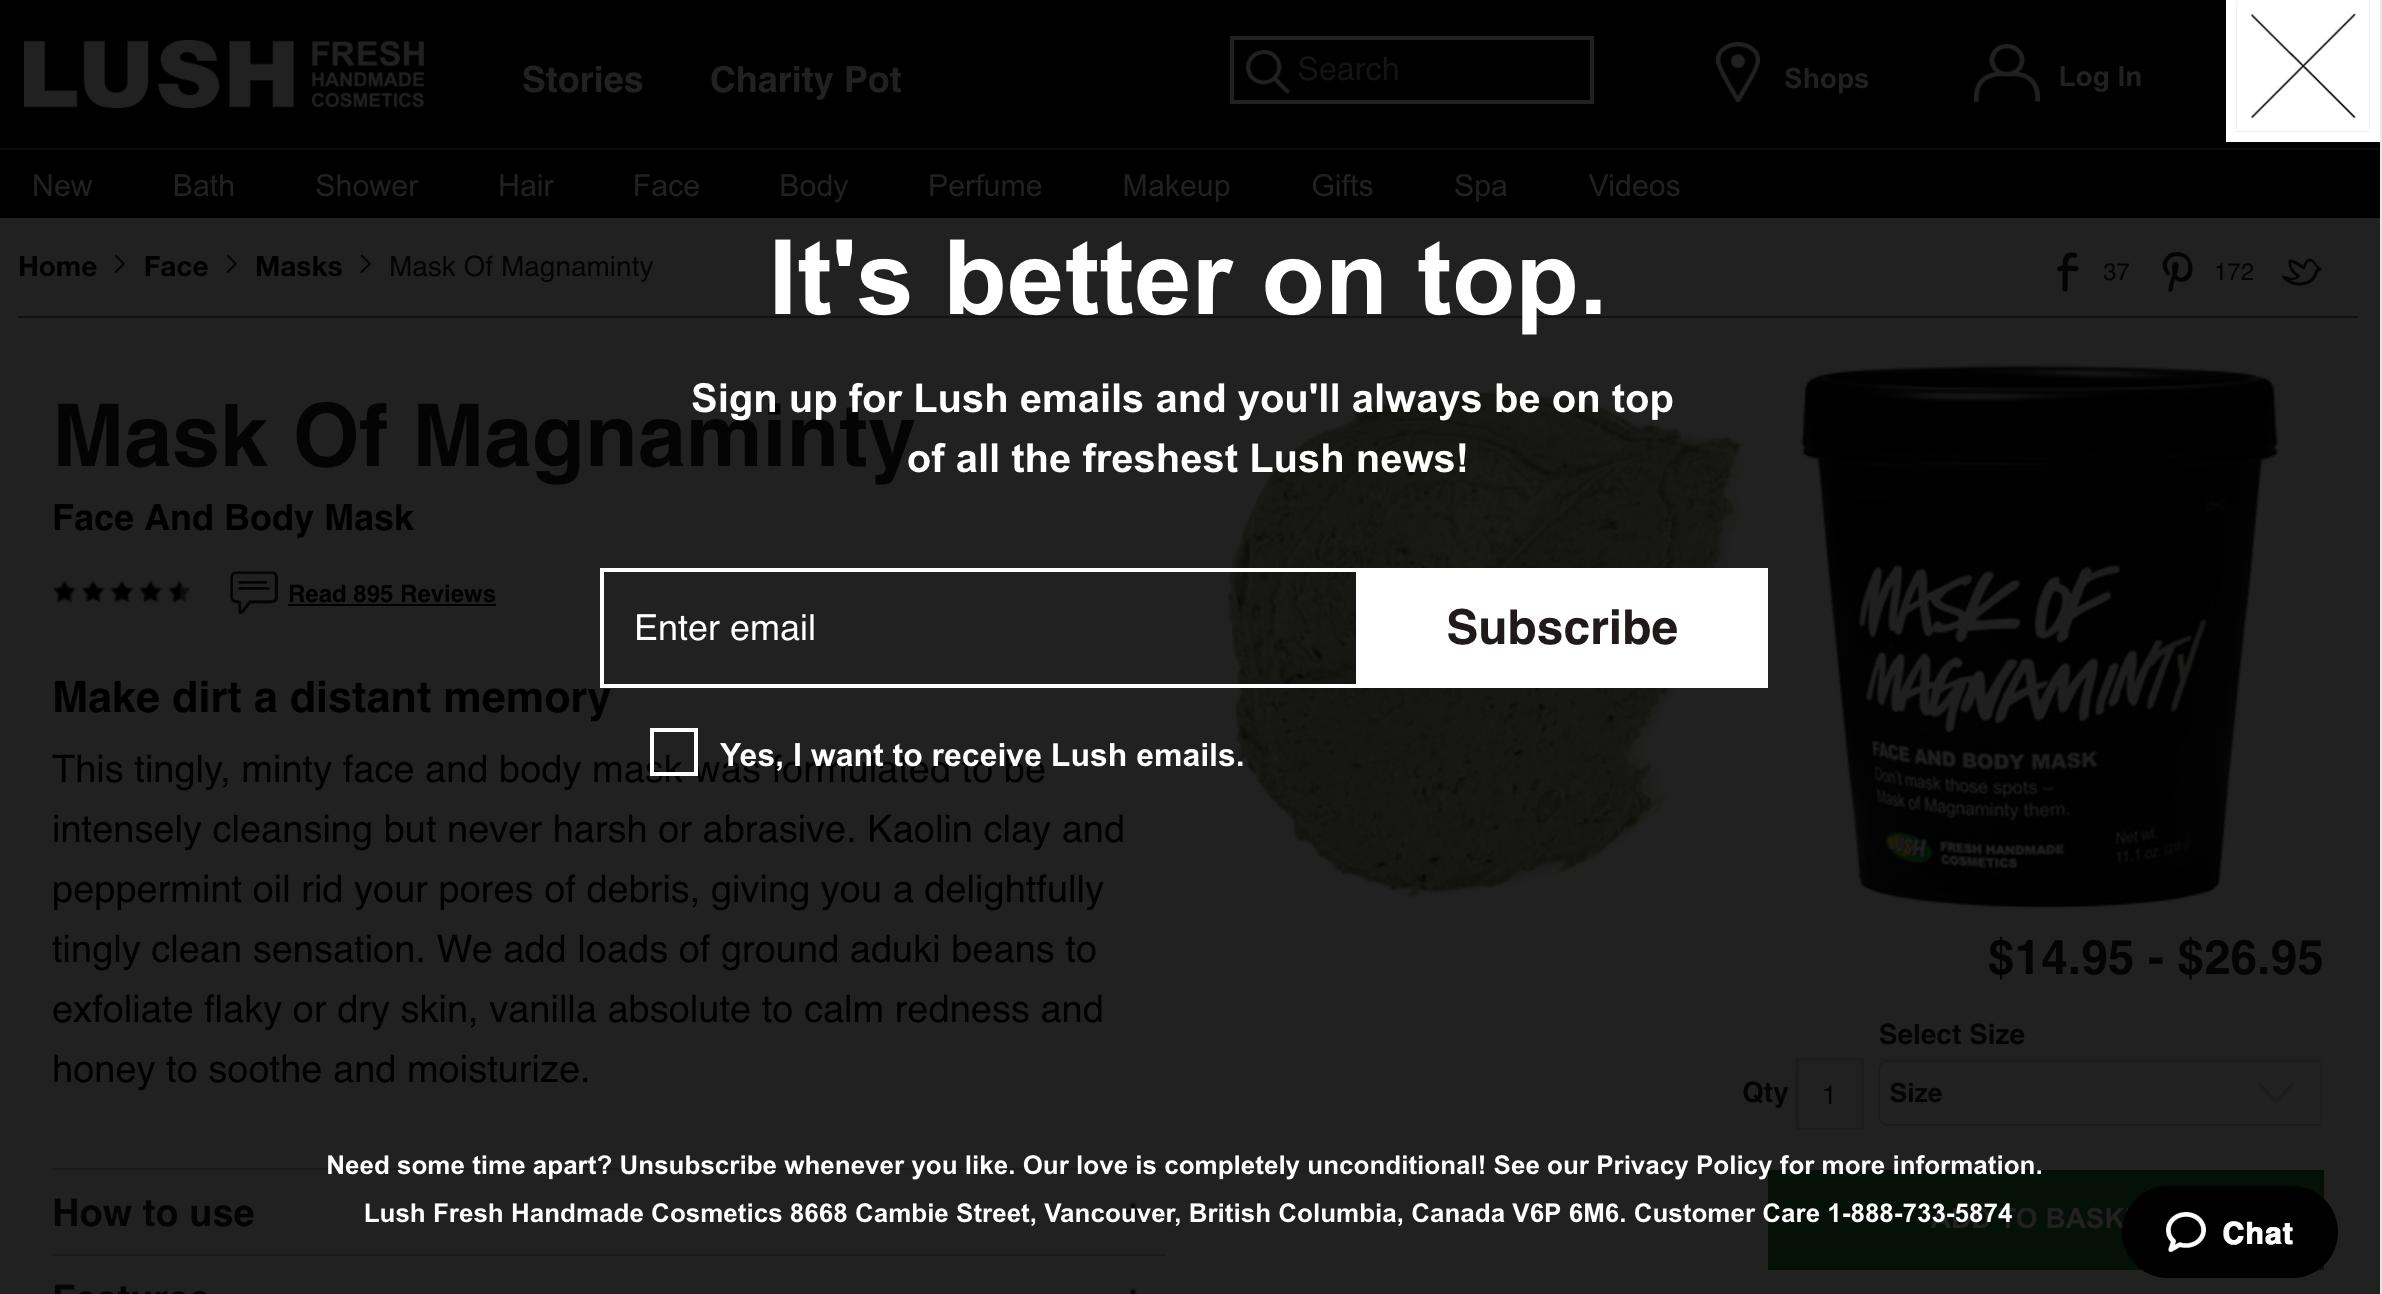 Email signup screen from Lush Cosmetics